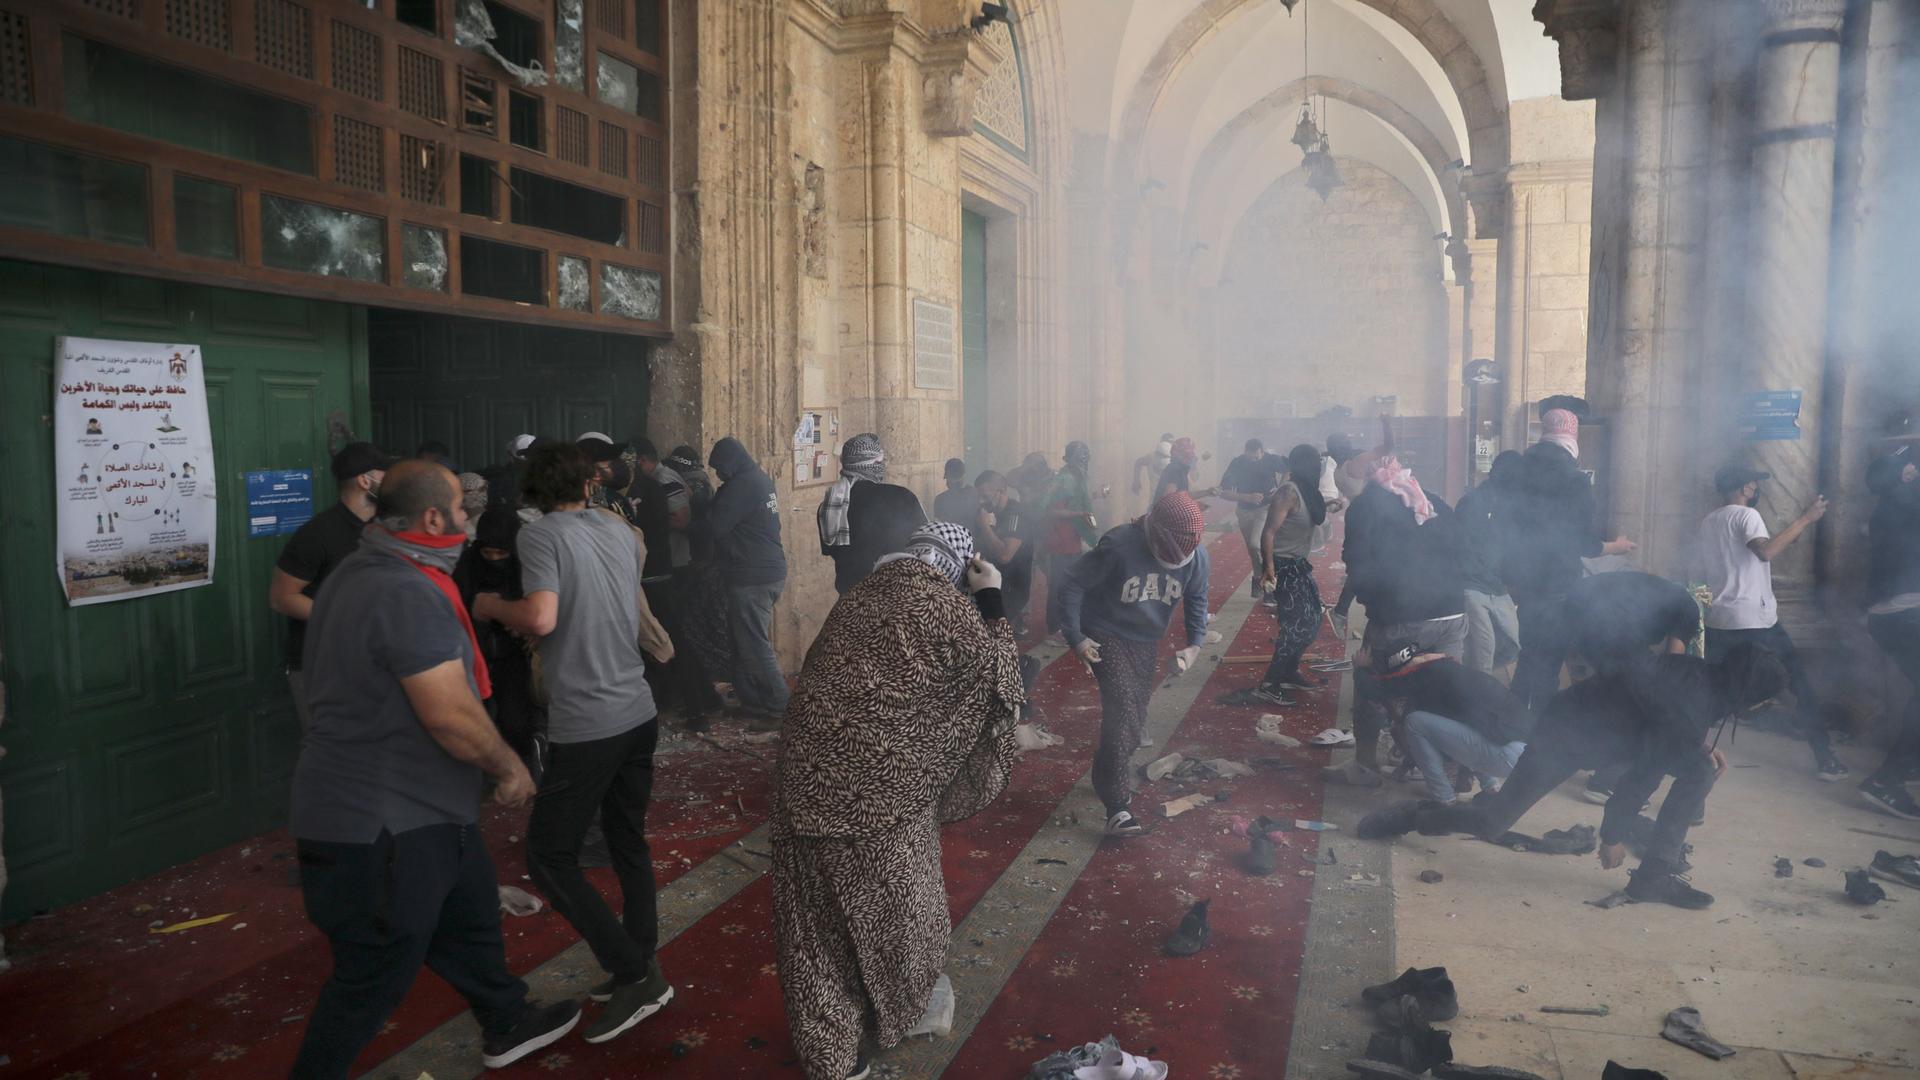 A large crowd of people are shown scattered in the Al-Aqsa Mosque as tear gas is shown surround the area.